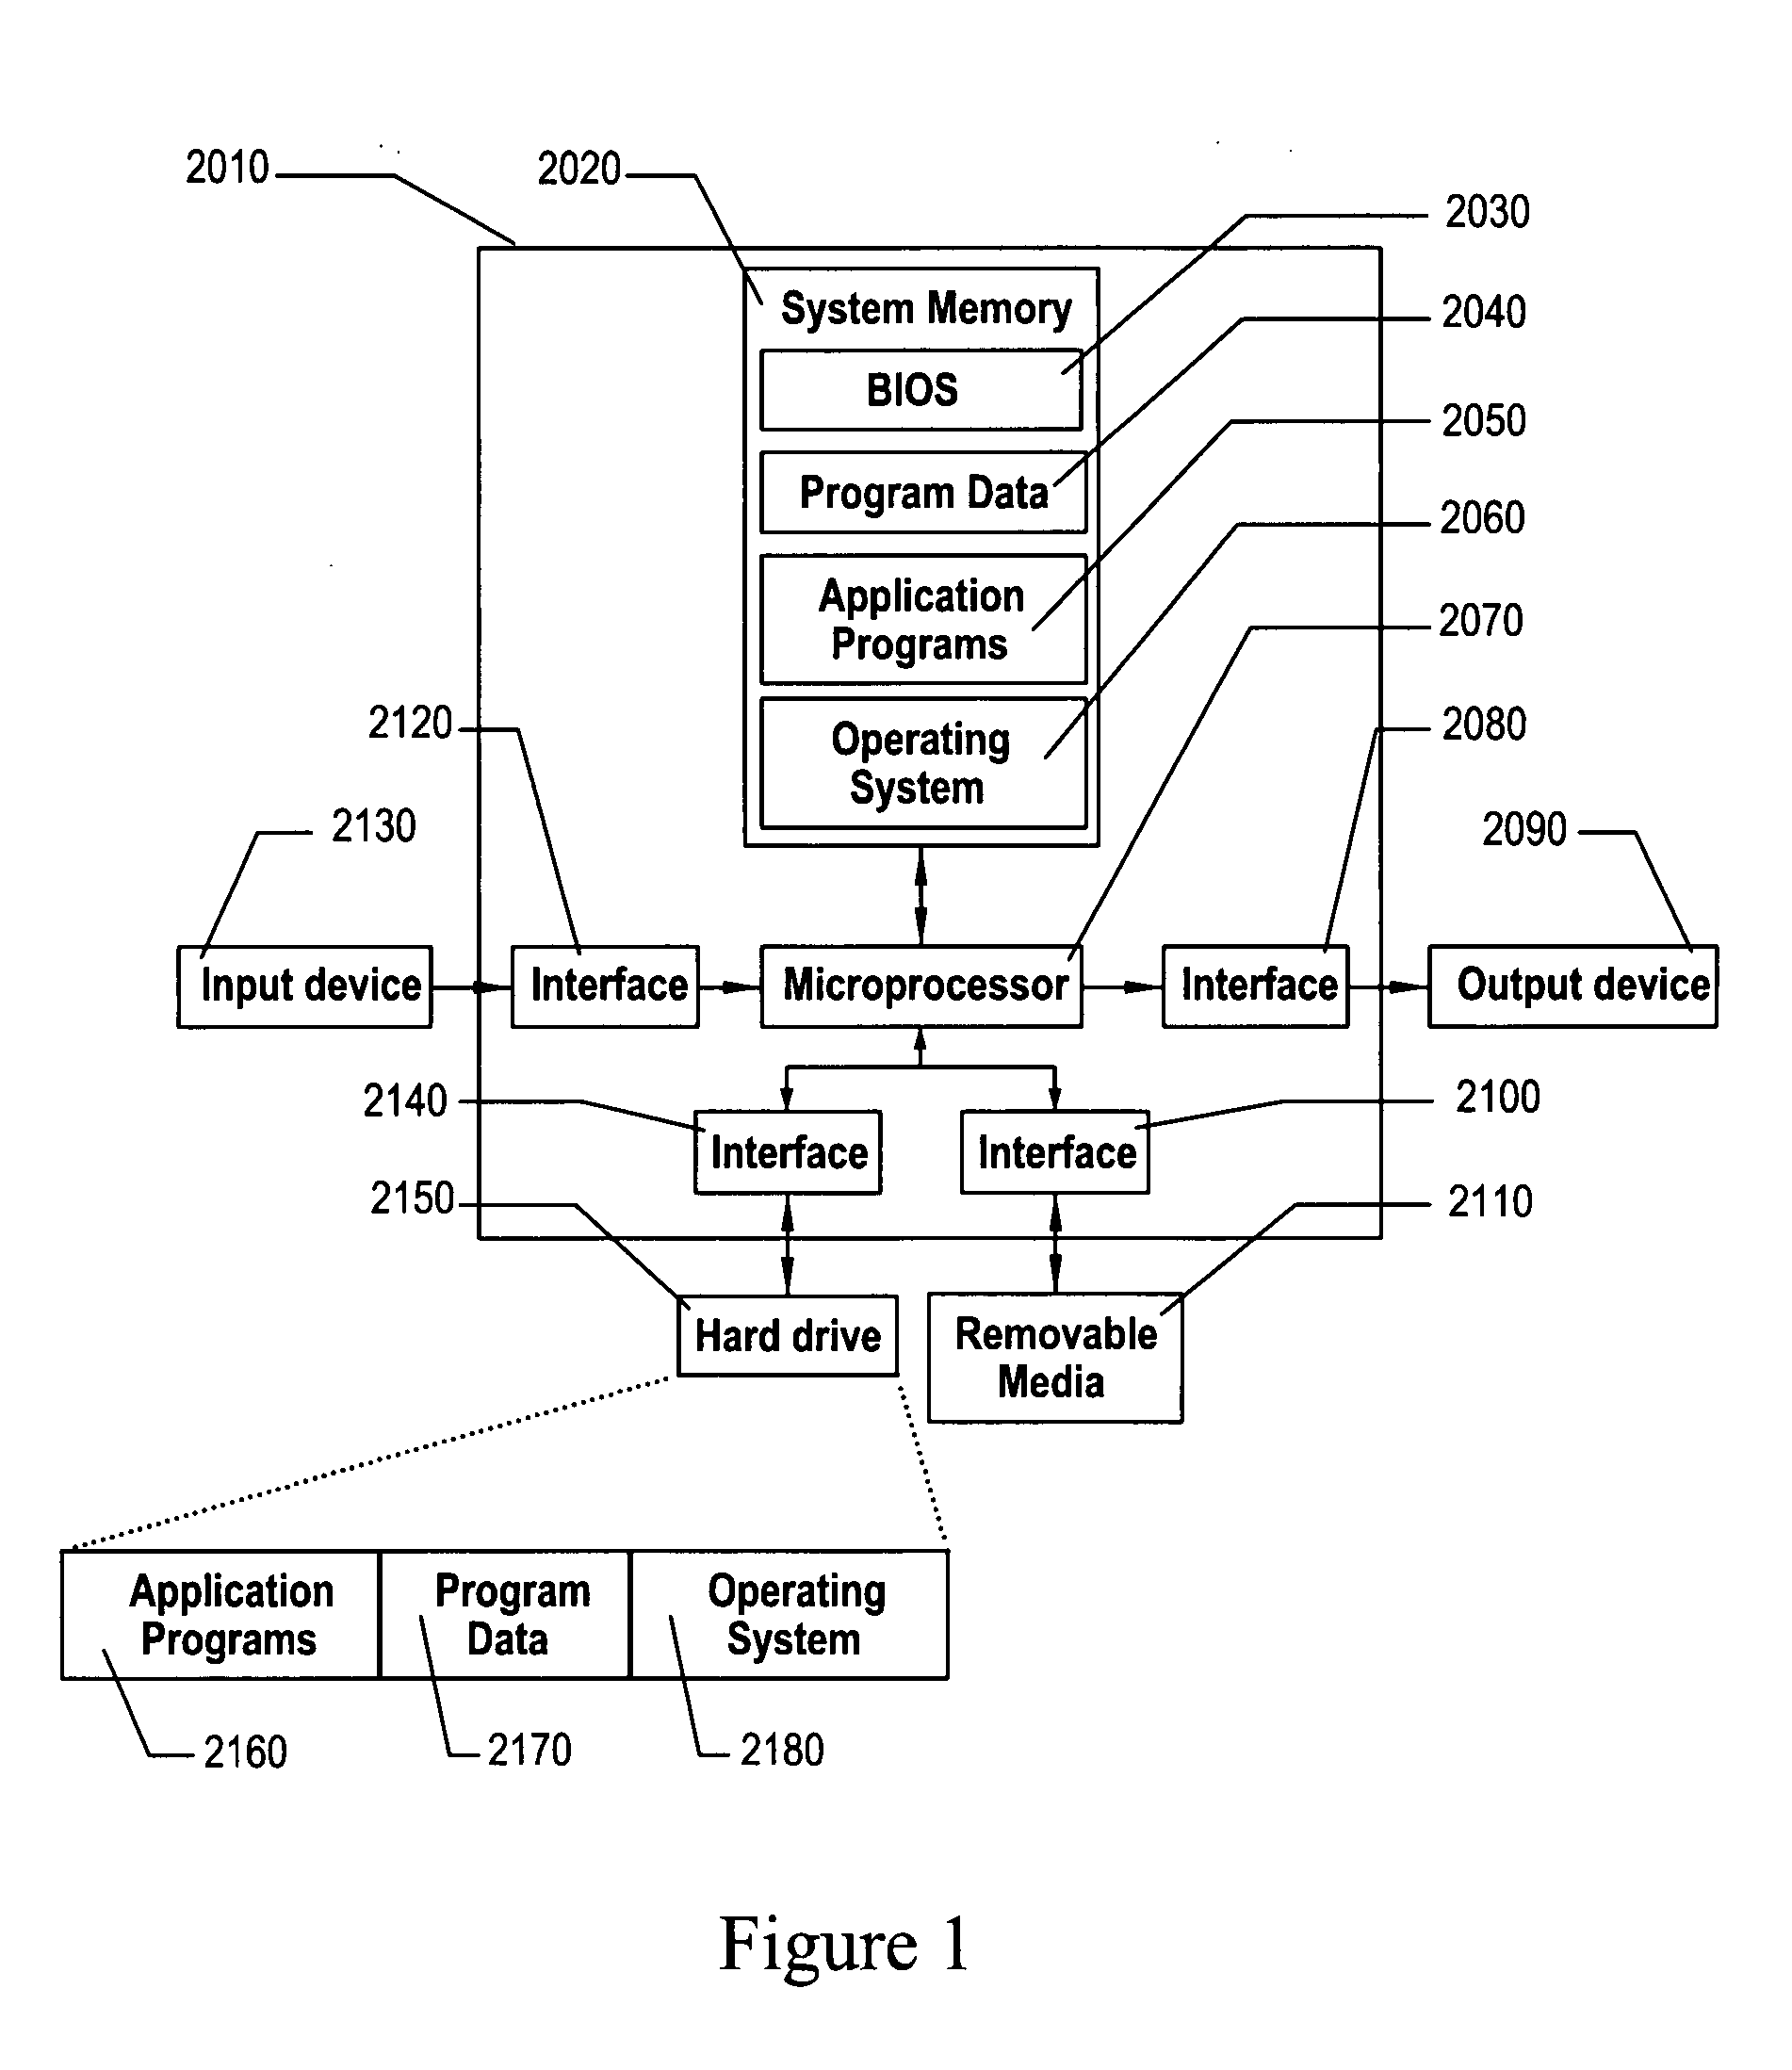 Method of object recognition in image data using combined edge magnitude and edge direction analysis techniques